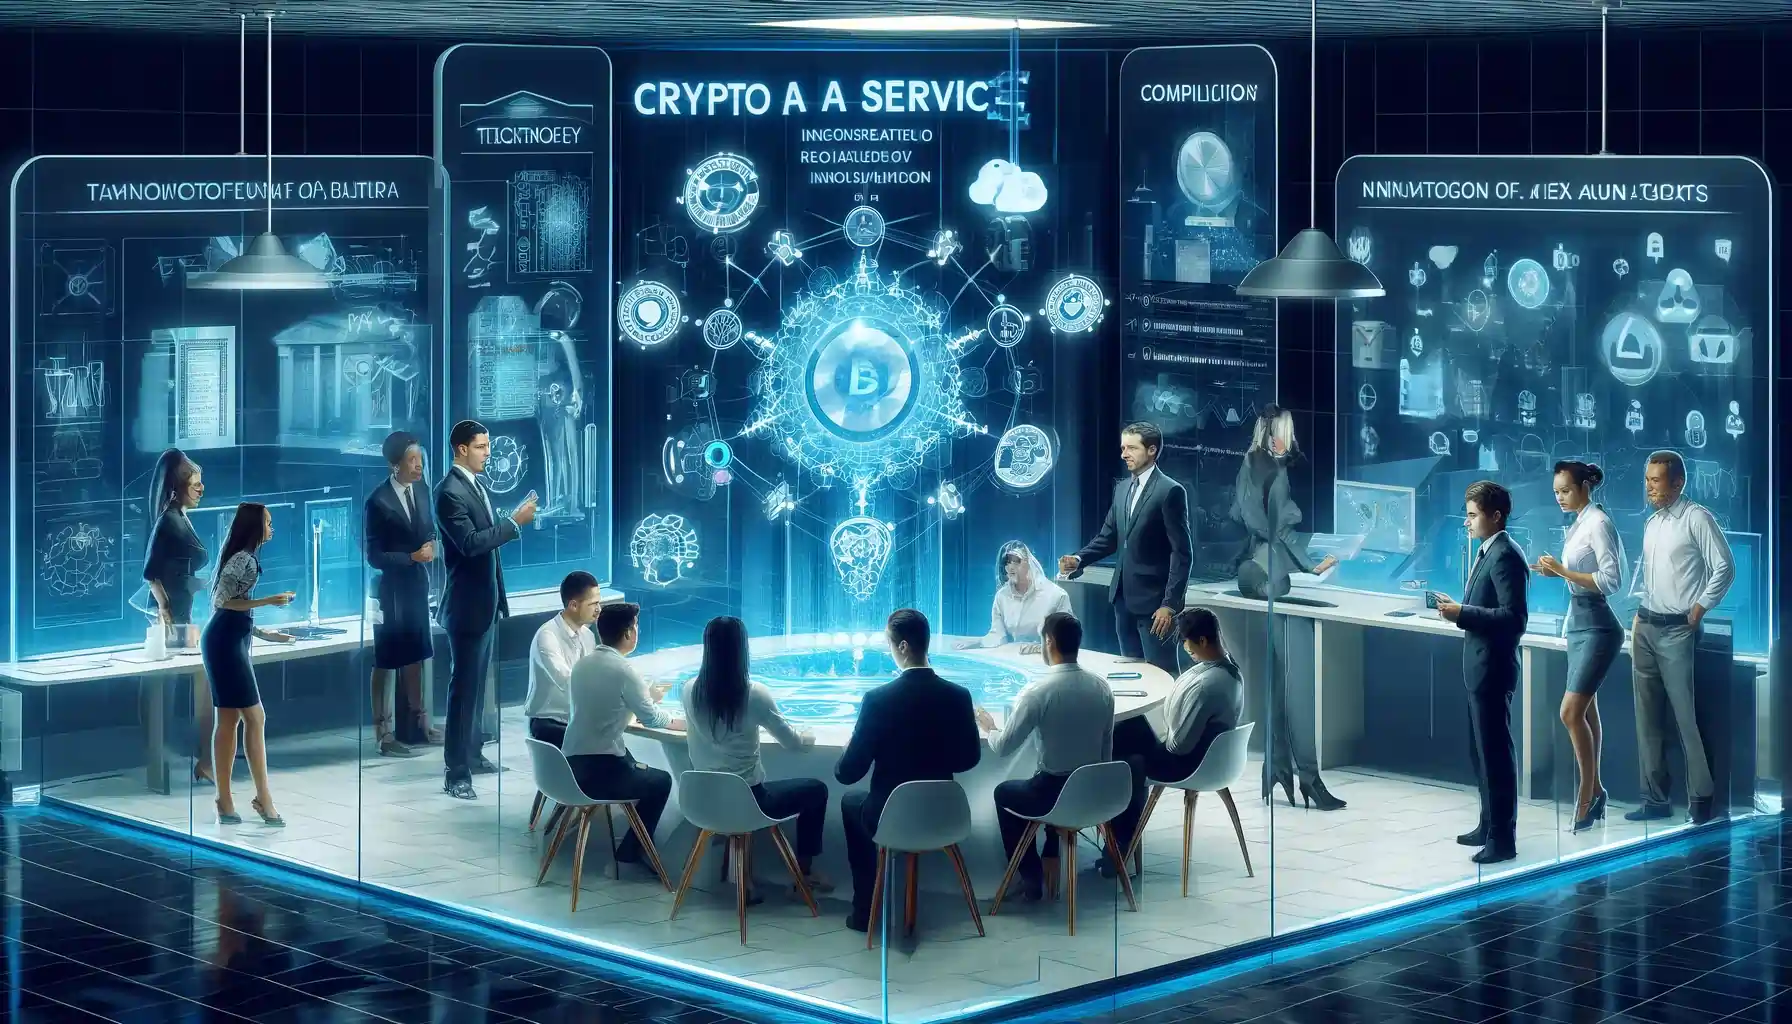 What are crypto service providers